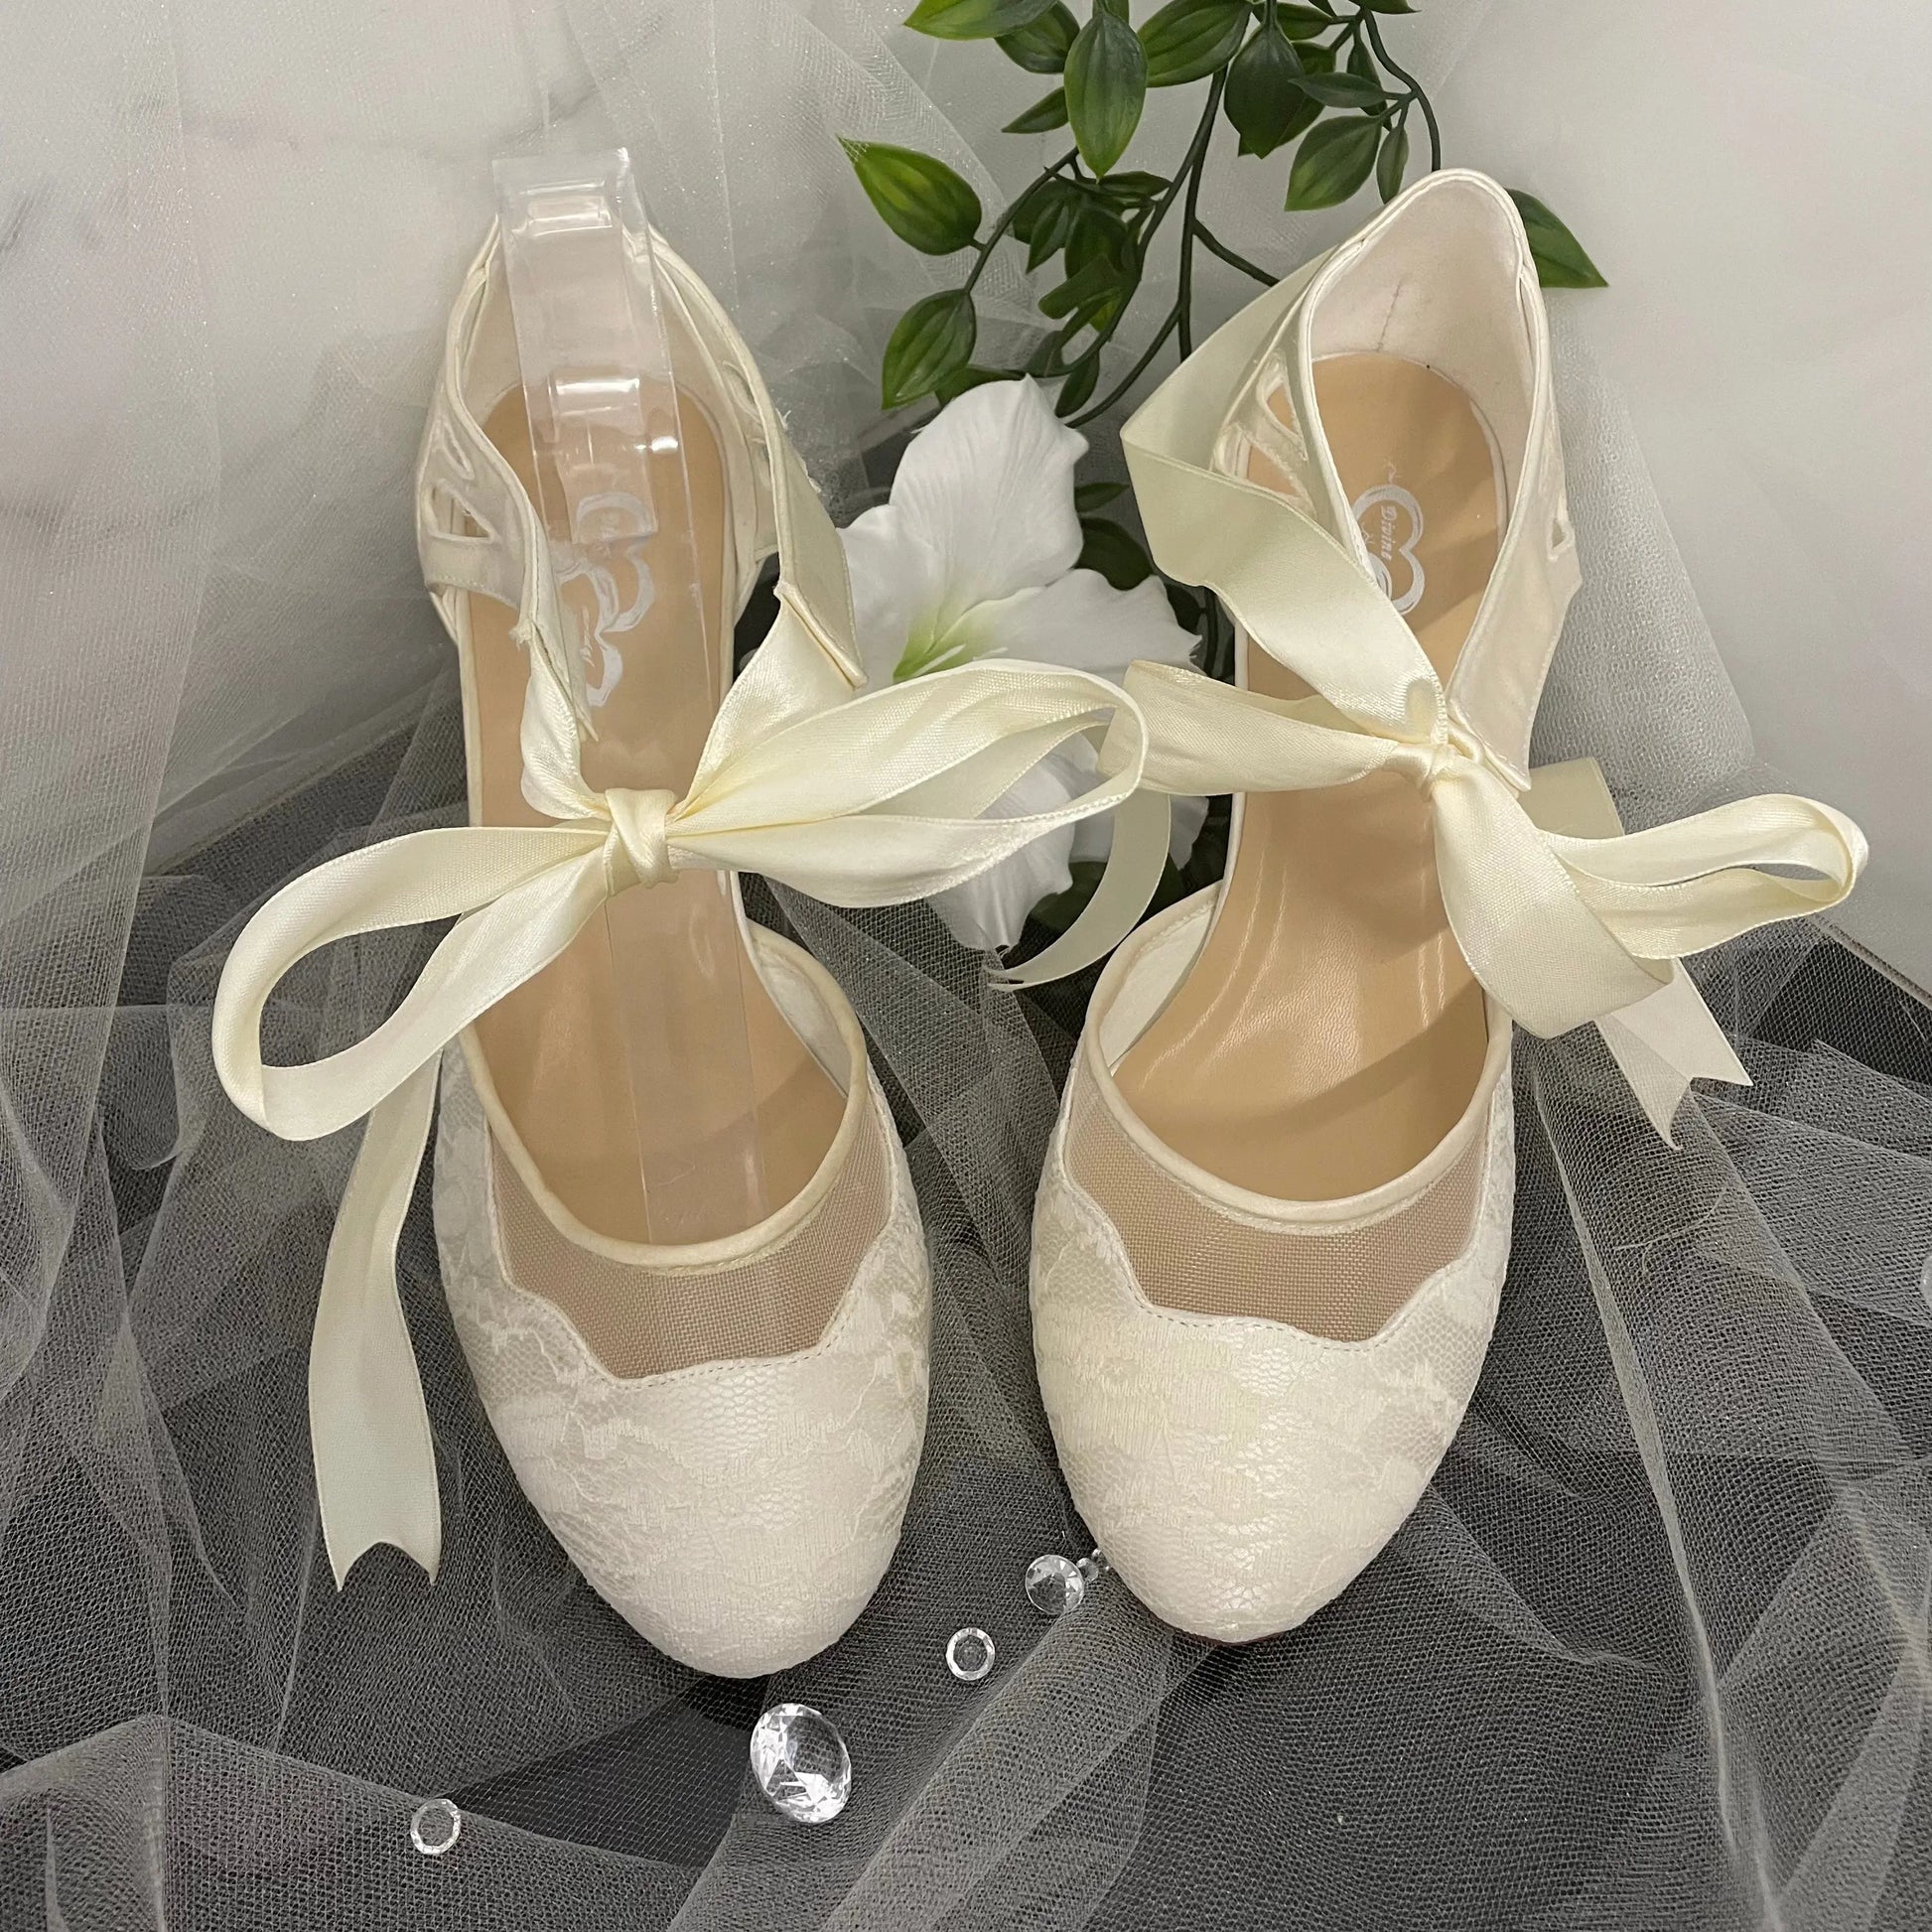 Elise Bridal Shoe Different Color View: View of the shoes showing the slight color difference due to display stock.